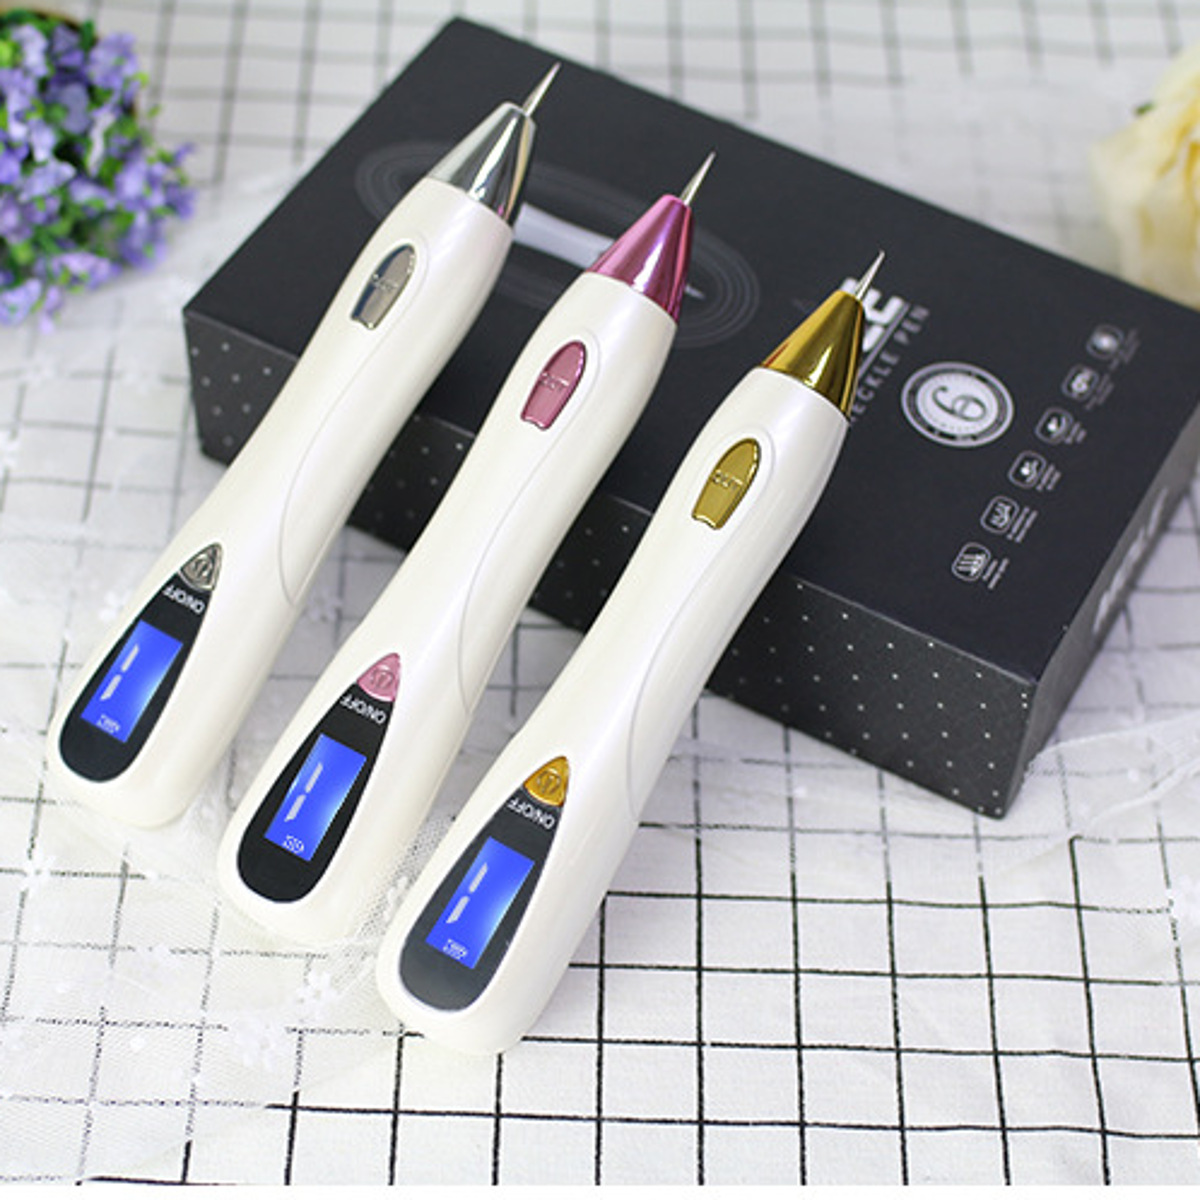 LCD Display Laser Mole Removal Pen Freckle Wart Removal